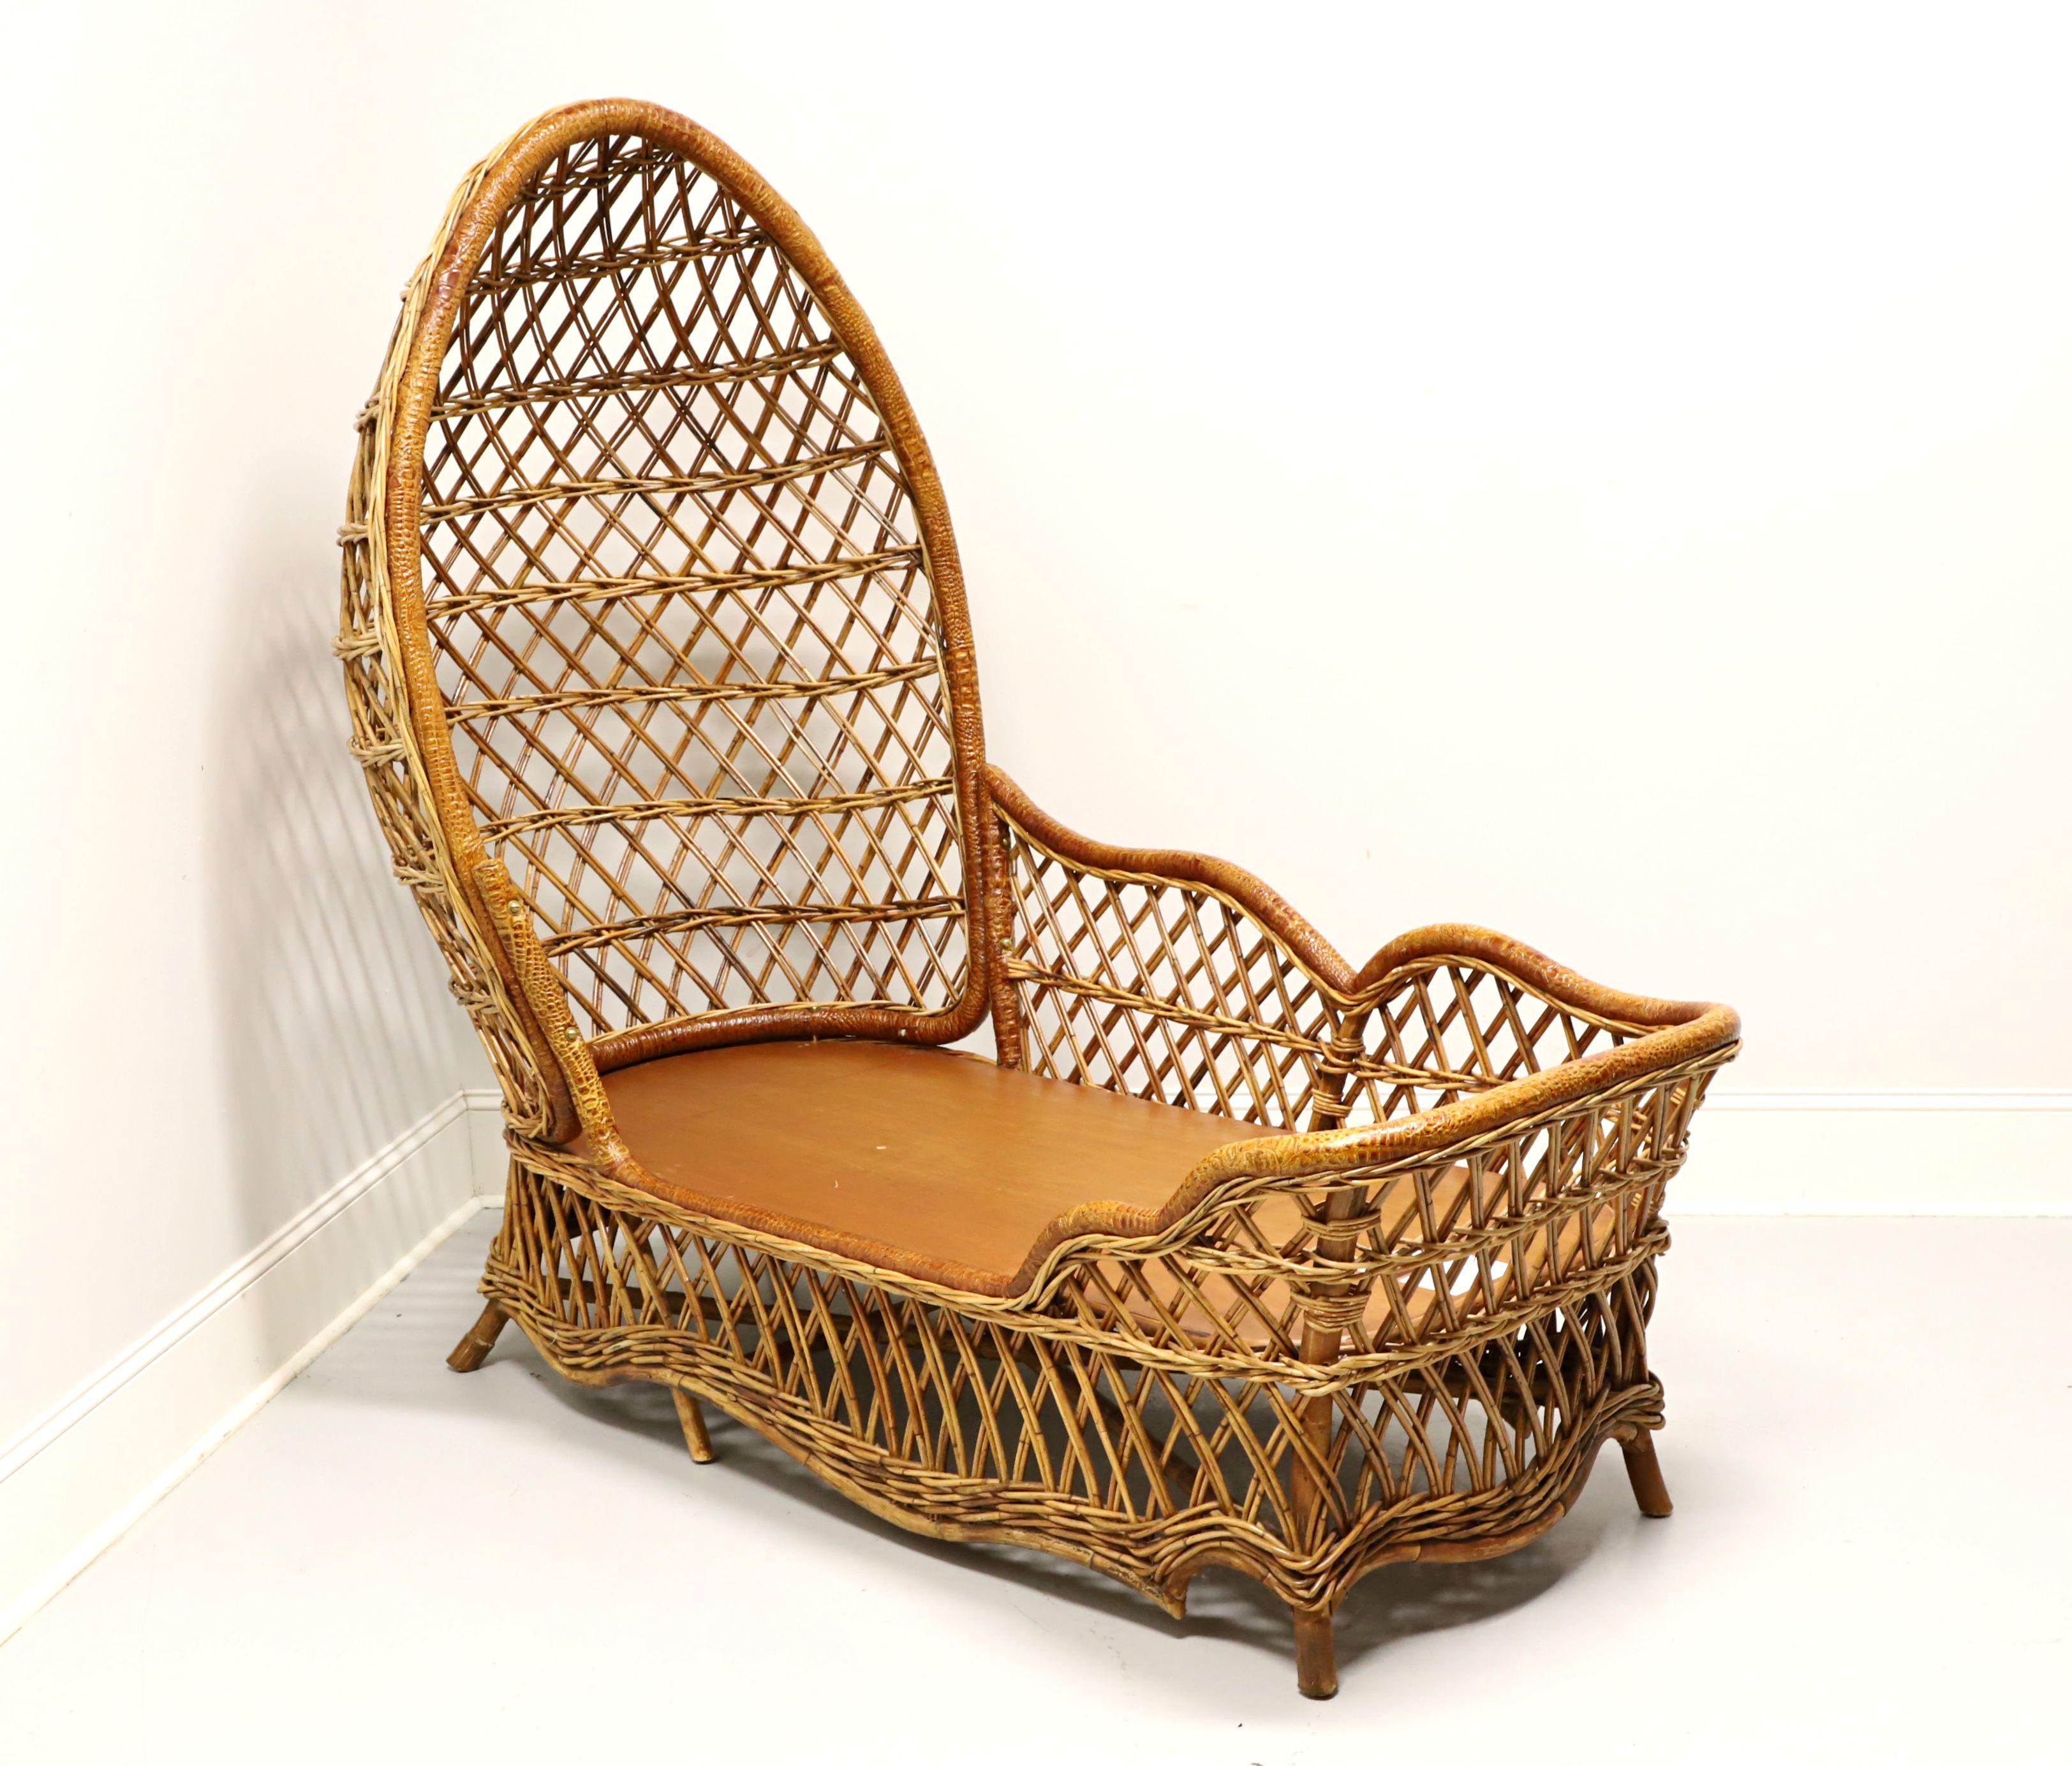 A Safari style rattan wicker chaise lounge by Lane Venture. Natural woven rattan wicker, wood frame, egg-like surround high back, decorative faux reptilian leather wrap to edges, solid wood under cushion support, and flared legs. Features the woven